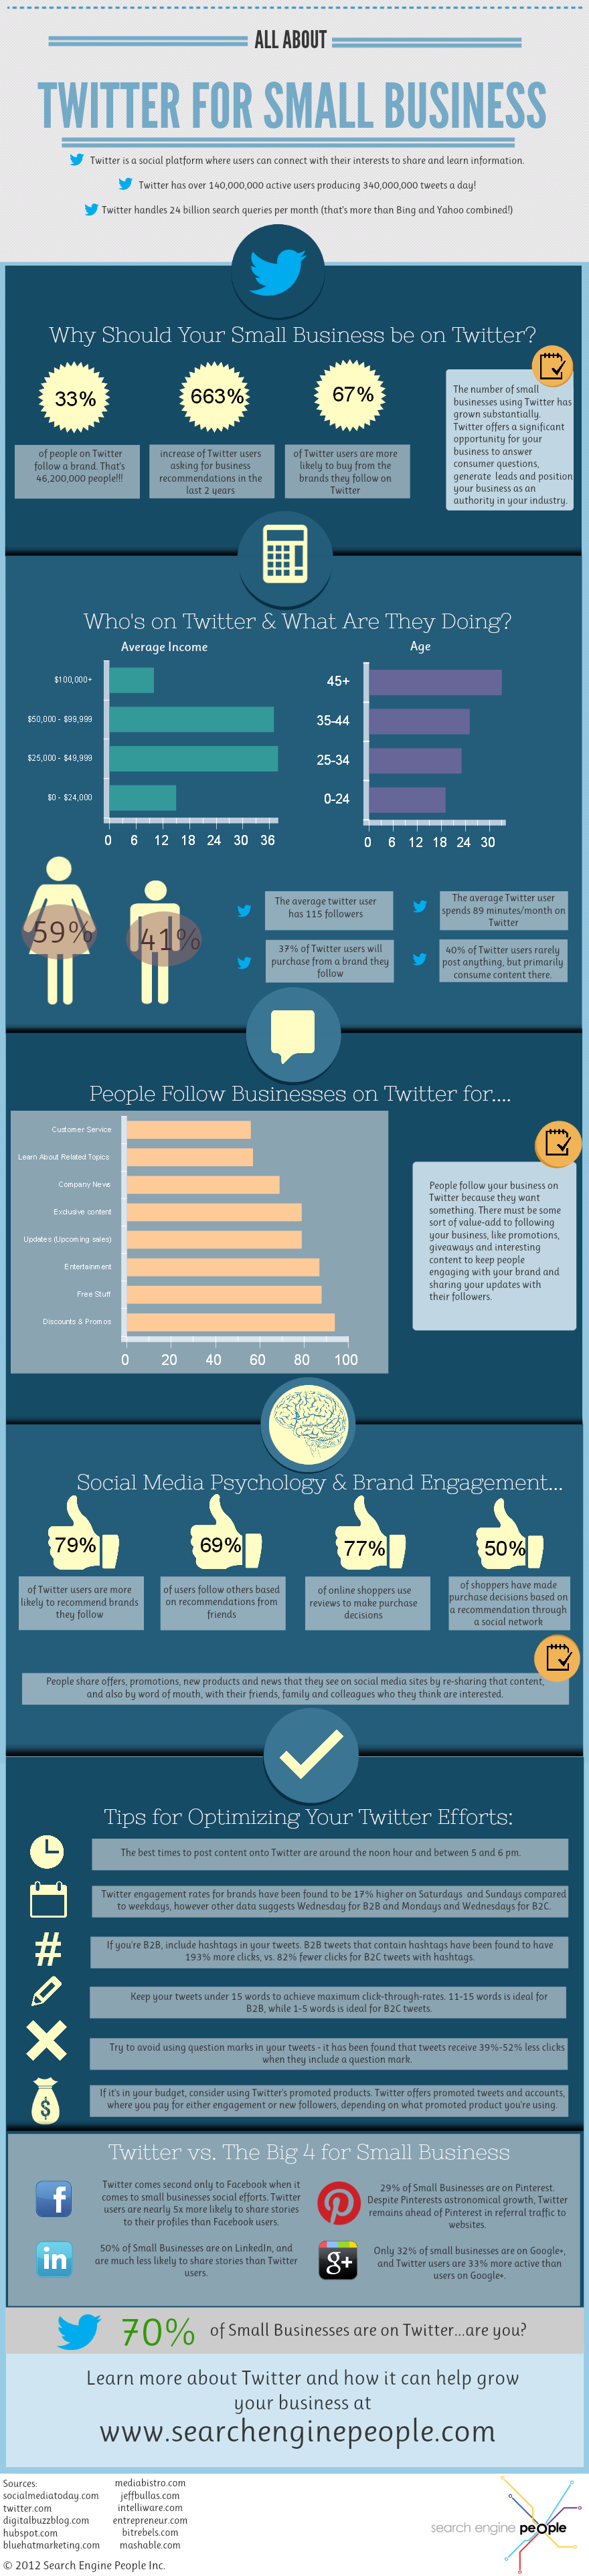 Twitter for Business: Statistics, Facts, and Pointers